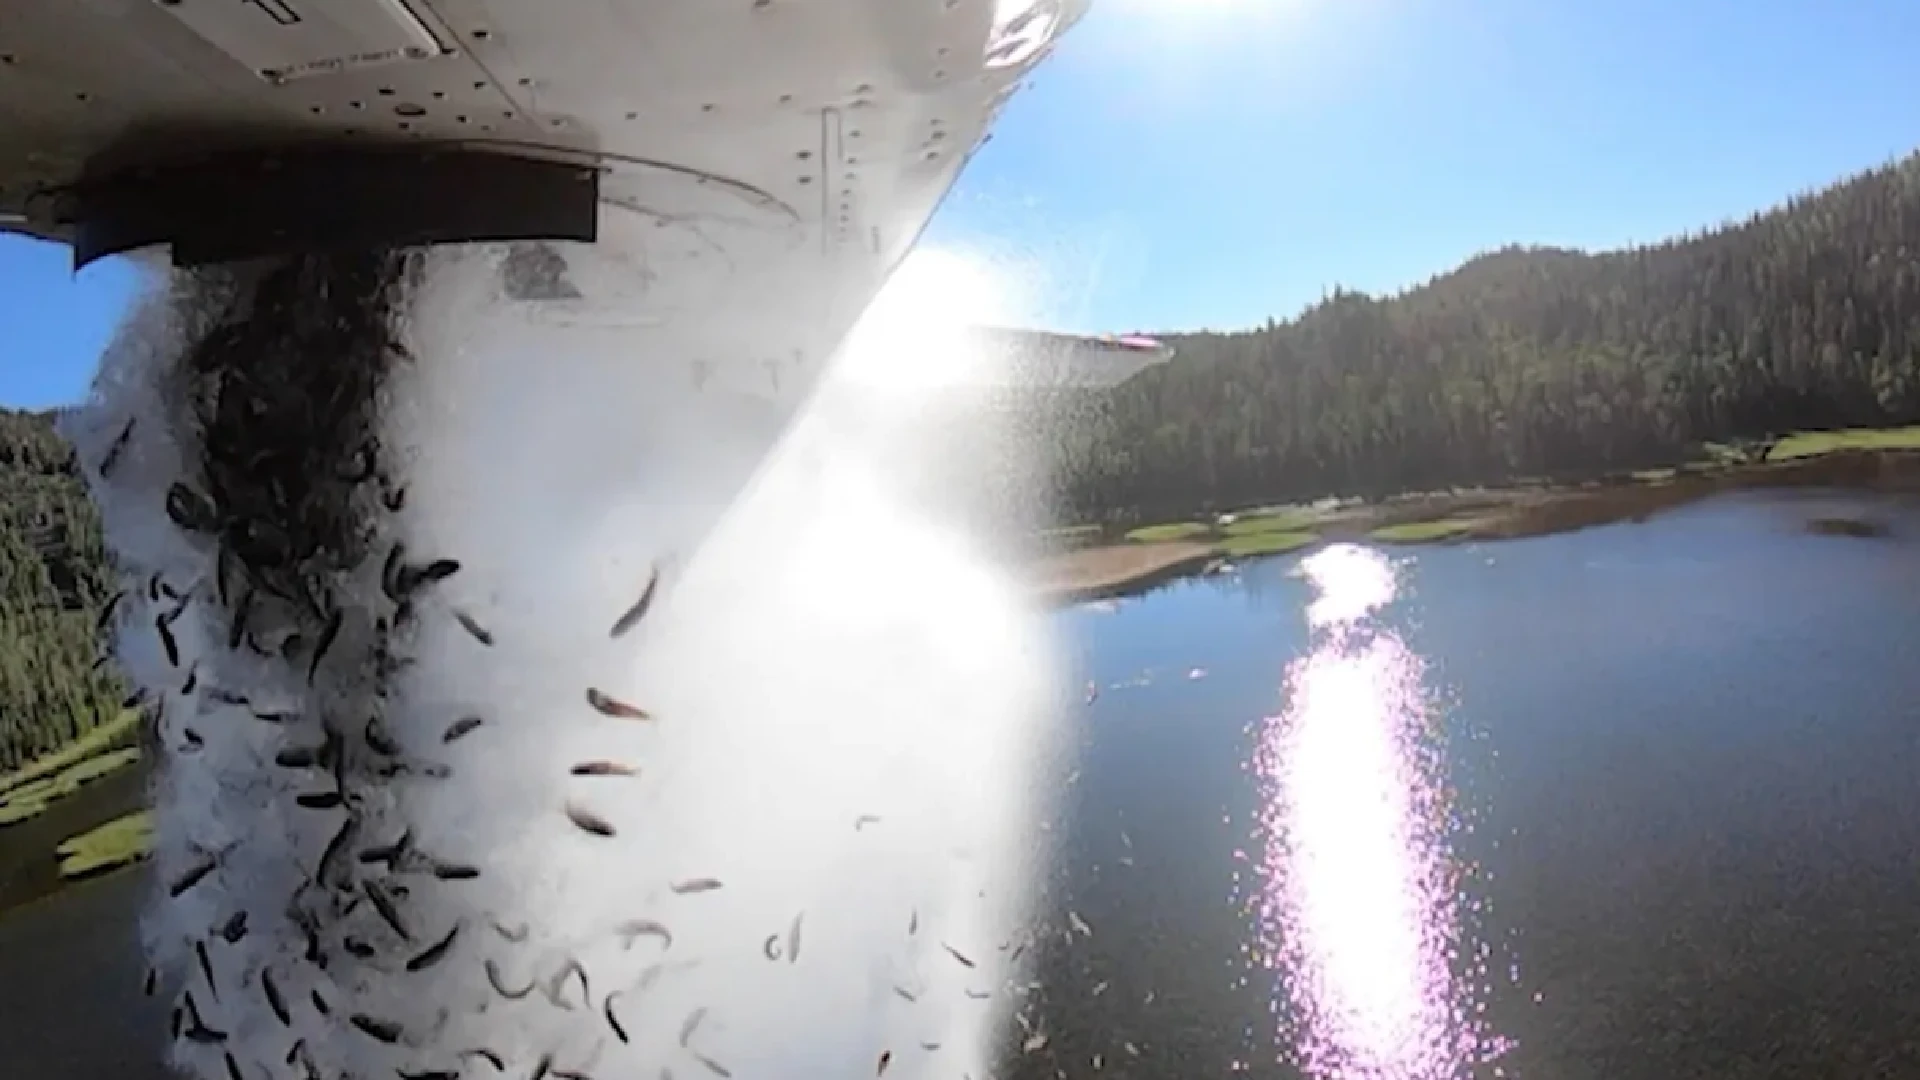 It’s Raining Fishes From The Sky, Watch A Spectacular Footage Of Thousands Of Fish Releasing From A Plane